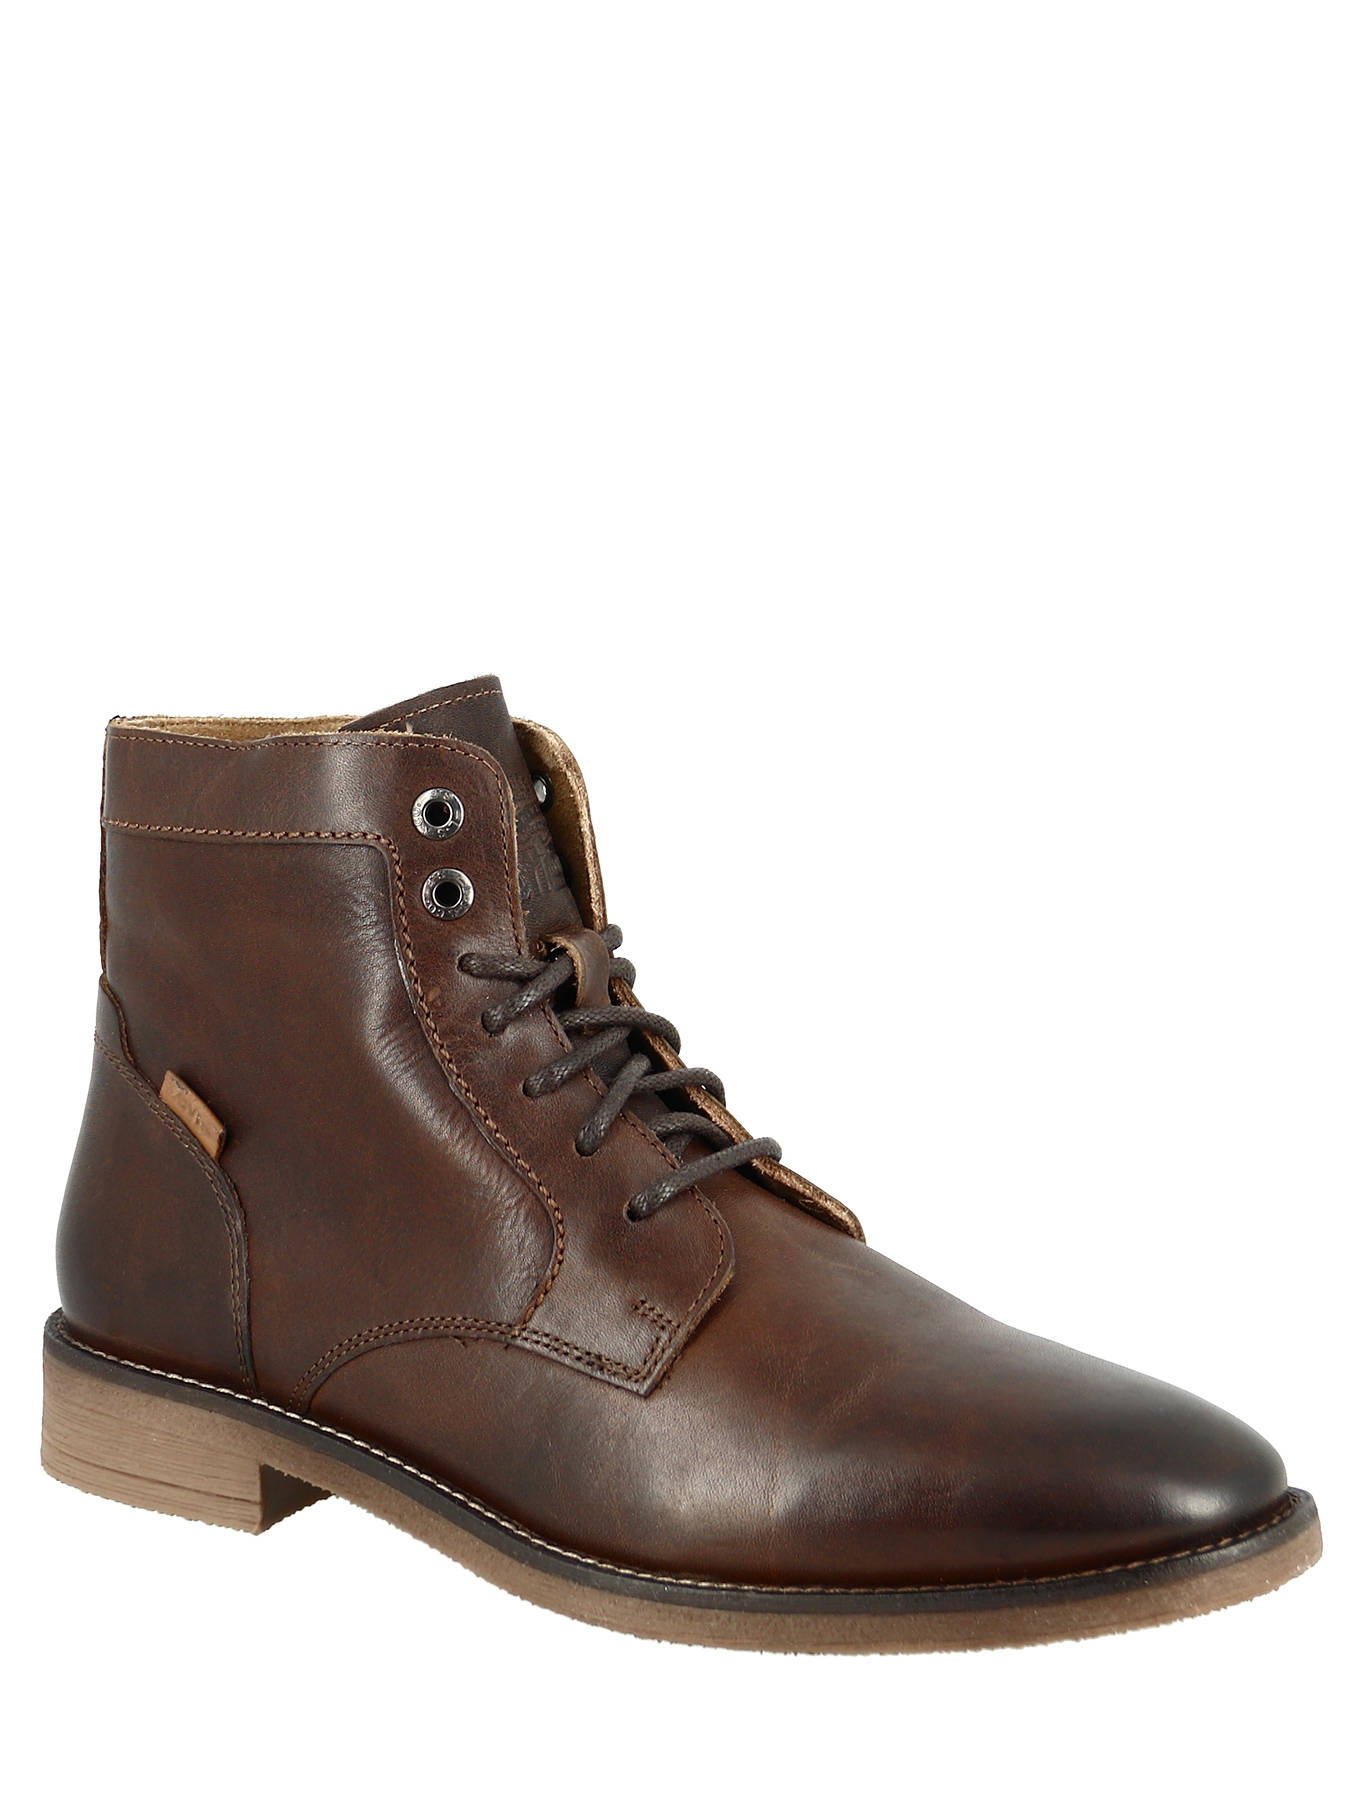 levis whitfield boots Cheaper Than 